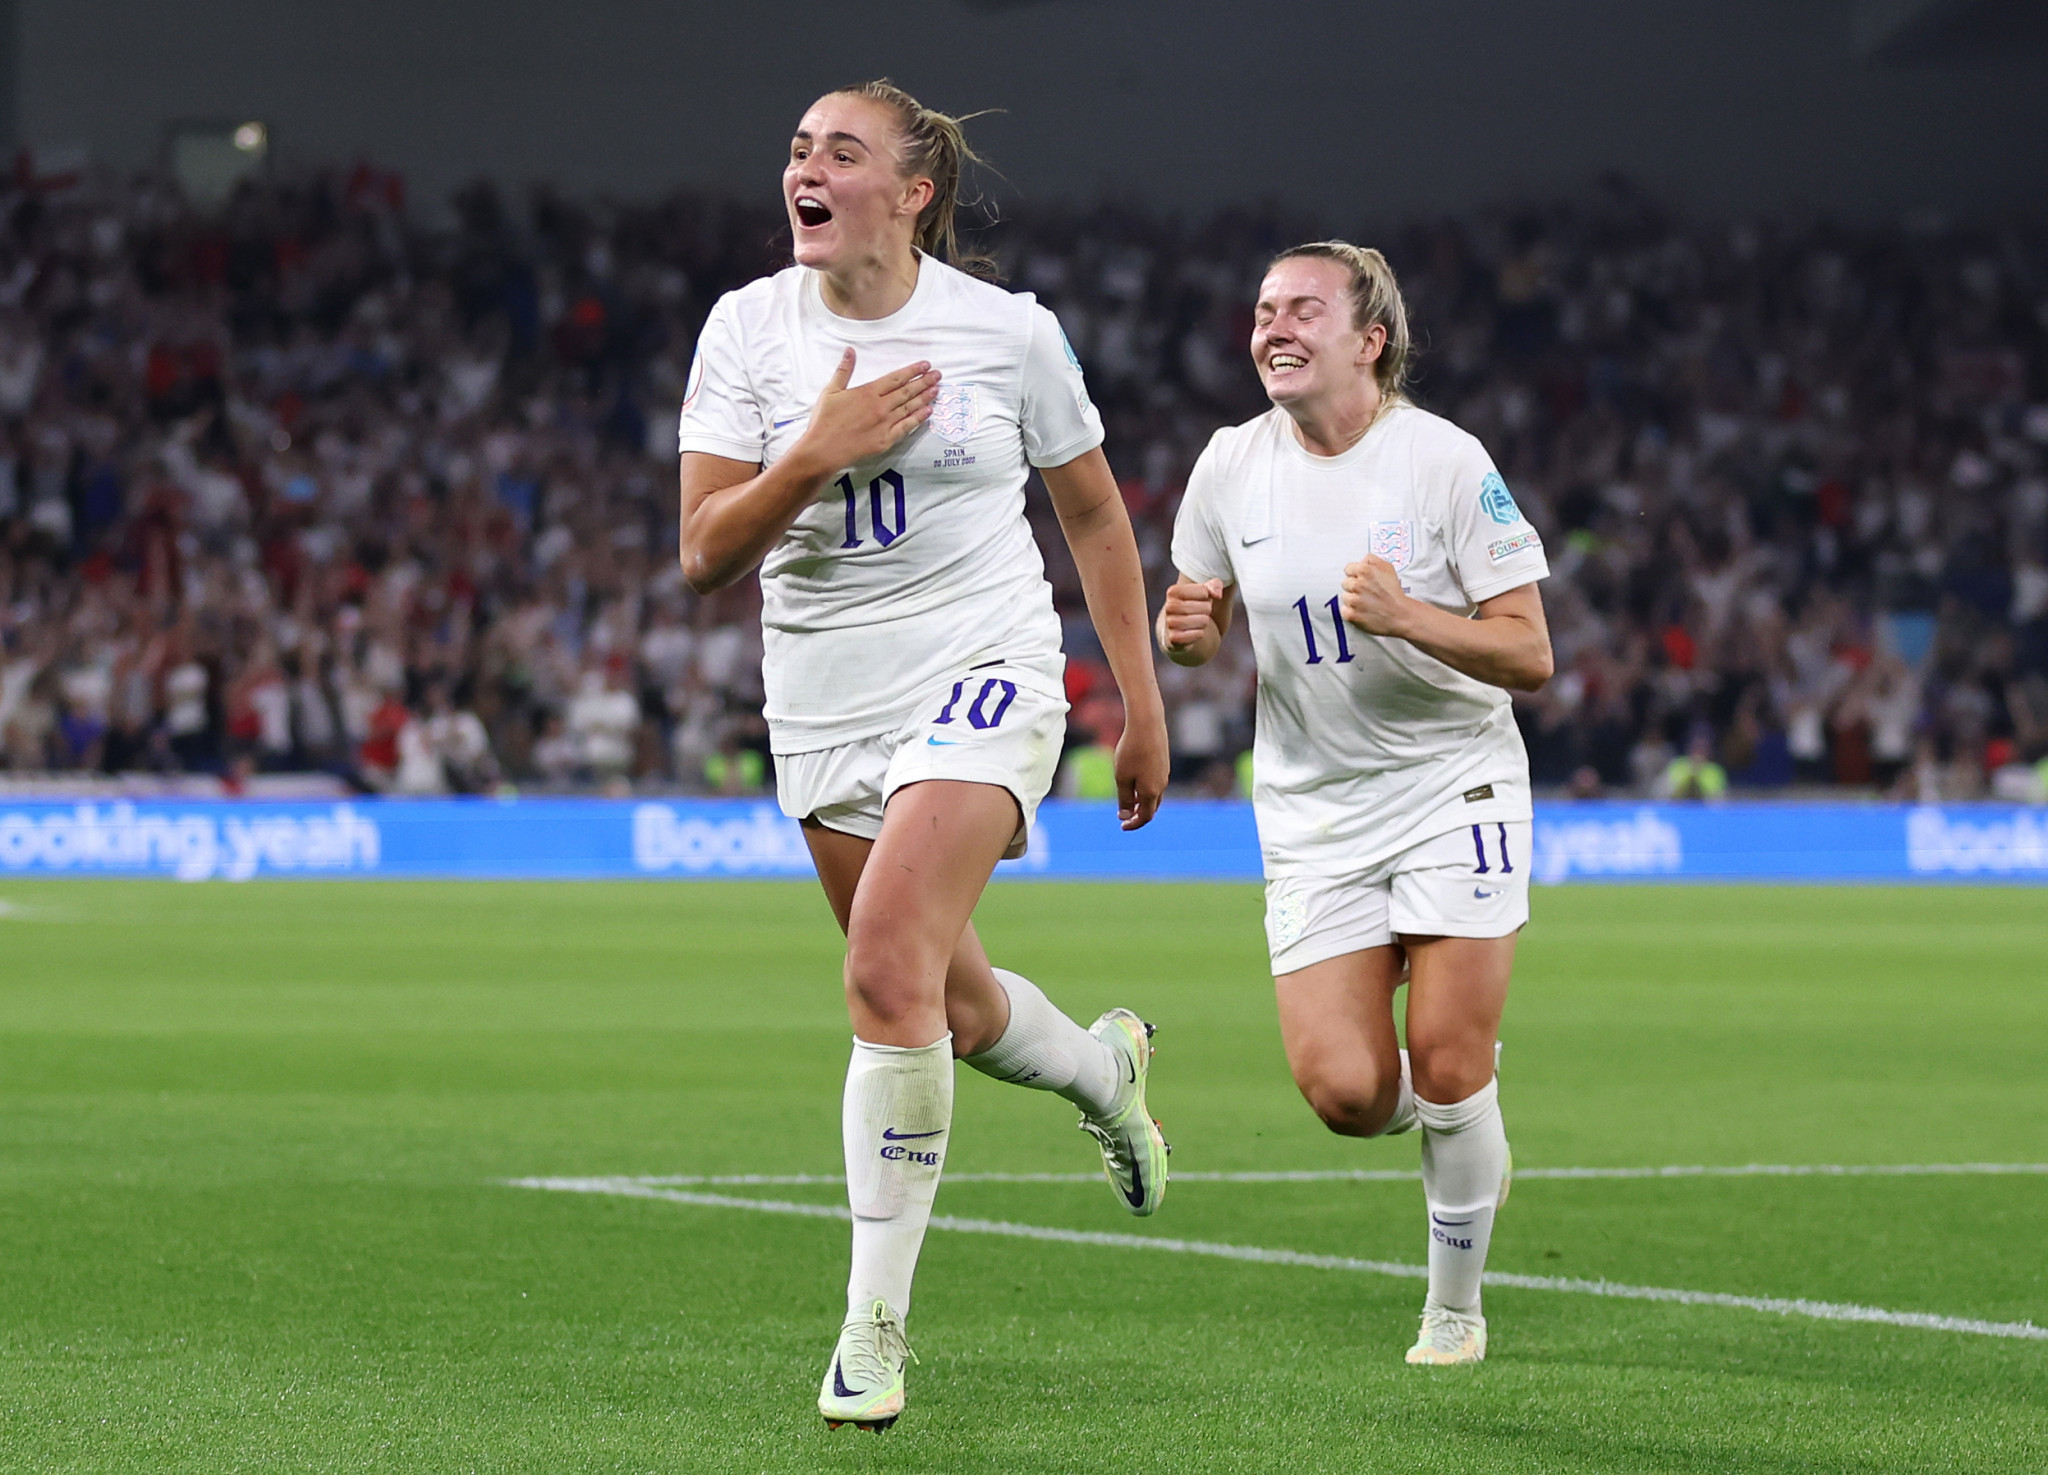 England have made it to semi-finals of the Women's Euro 2022 with a 2-1 win over Spain ©Getty Images